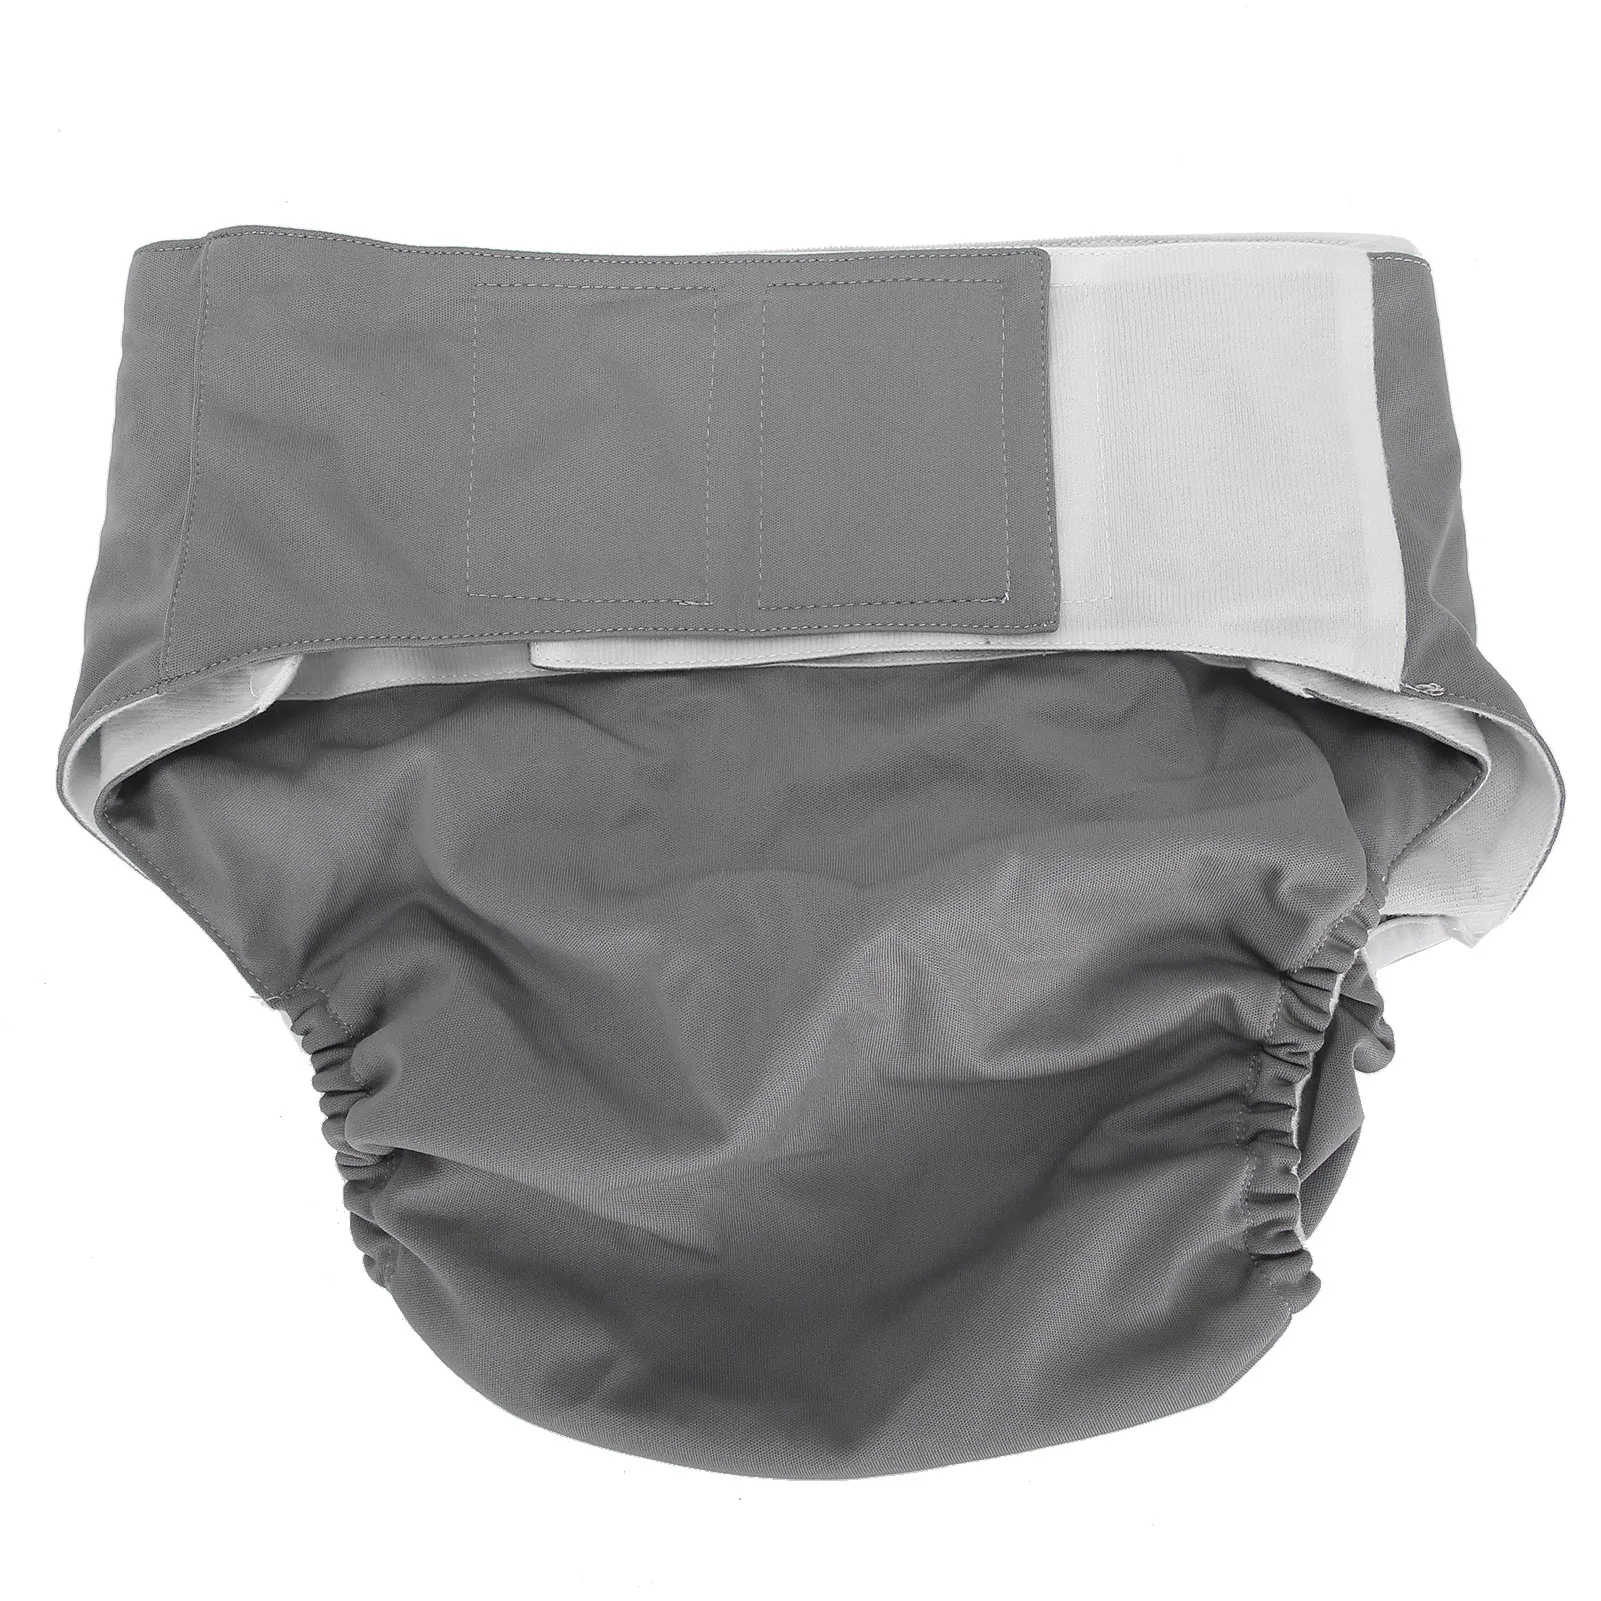 Plastic Pants Adult，Adult Incontinence Safety Trousers，Plastic Diapers,  Waterproof and Reusable Anti Side Leakage Physiological Incontinence Pants,  Suitable for Adult Men and Women : Health & Household 